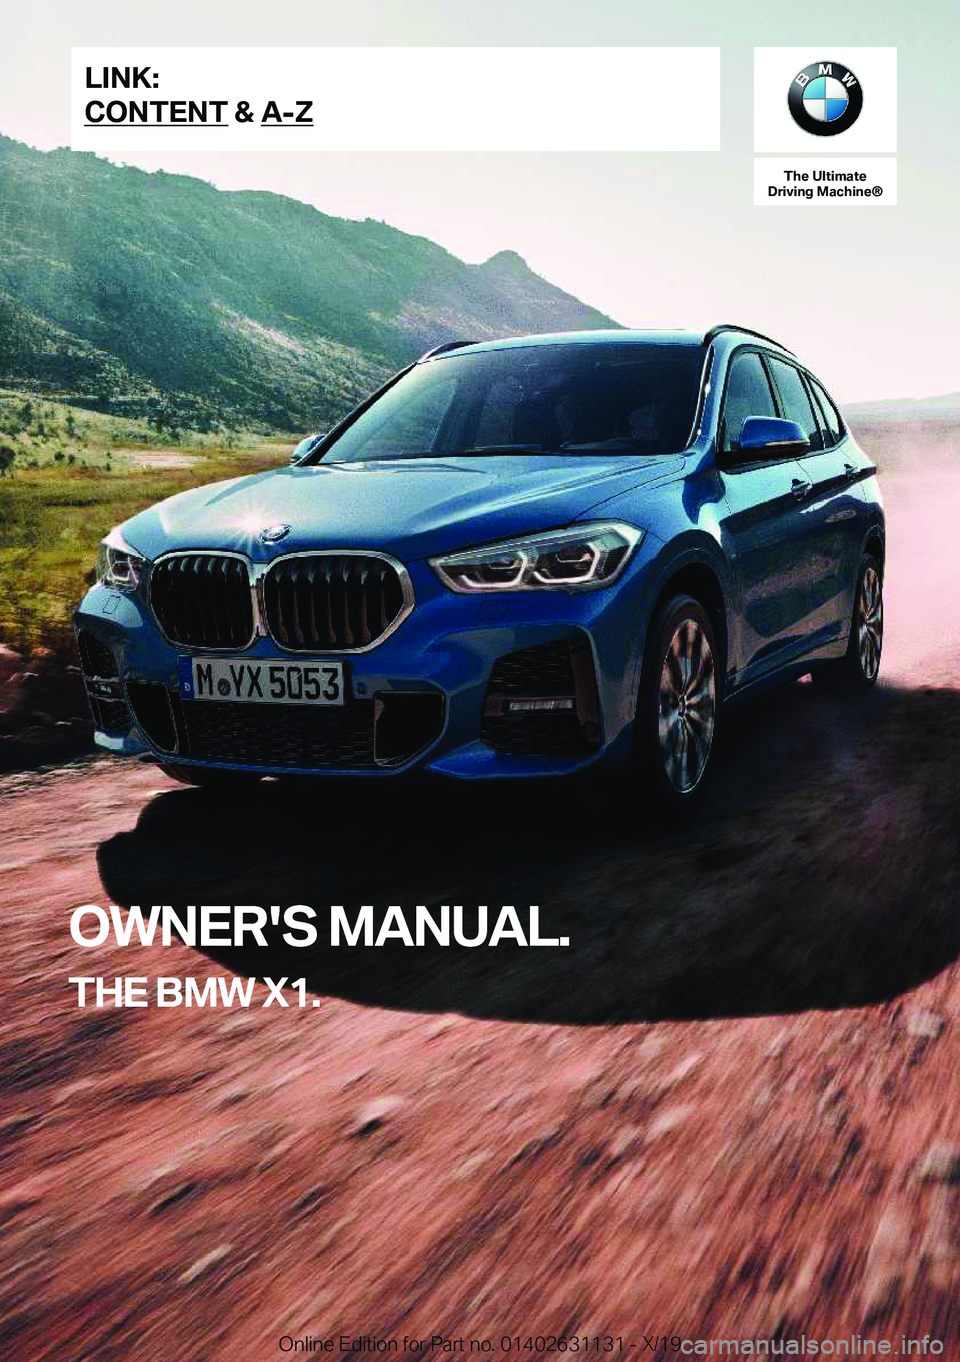 BMW X1 2020  Owners Manual �T�h�e��U�l�t�i�m�a�t�e
�D�r�i�v�i�n�g��M�a�c�h�i�n�e�n
�O�W�N�E�R�'�S��M�A�N�U�A�L�.
�T�H�E��B�M�W��X�1�.�L�I�N�K�:
�C�O�N�T�E�N�T��&��A�-�Z�O�n�l�i�n�e��E�d�i�t�i�o�n��f�o�r��P�a�r�t�